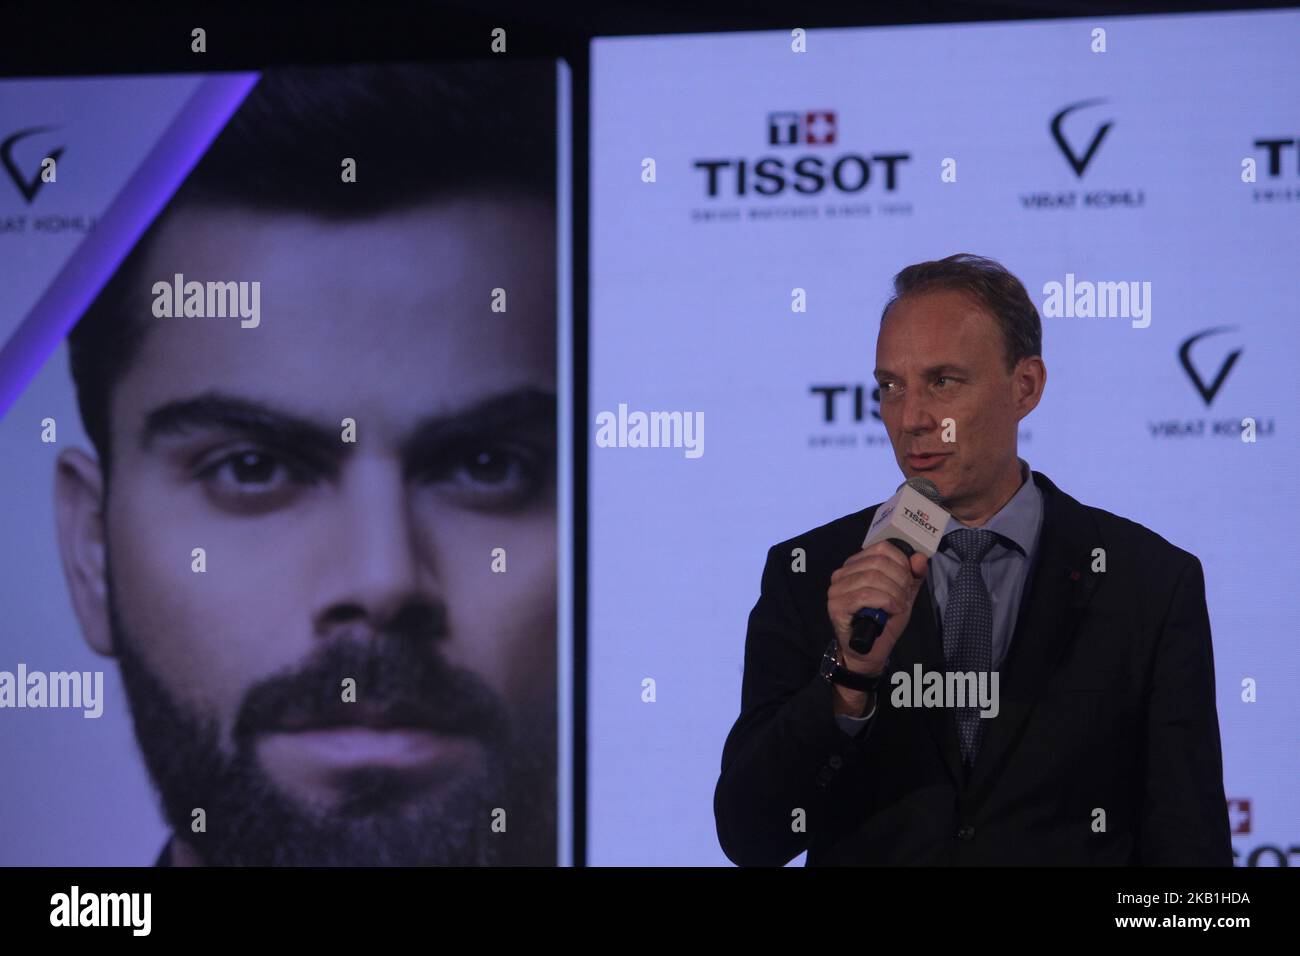 Olivier Cosandier VP Sales Tissot at Swatch Group talks during the unveiling of their special edition Tissot CHRONO XL Classic at hotel Taj Land Ends in Mumbai on September 26, 2018. The Tissot Chrono XL Classic edited especially for Virat Kohli embodies a unique set of customizations that personify Tissot Ambassador. Known as the Tissot Chrono XL Classic Virat Kohli 2018, the watch features his navy blue logo engraved on its white silk-printed caseback and a navy blue leather strap enhances the sporty aesthetics of this special edition. The stopwatch number 20 is changed by 18 and stands out  Stock Photo